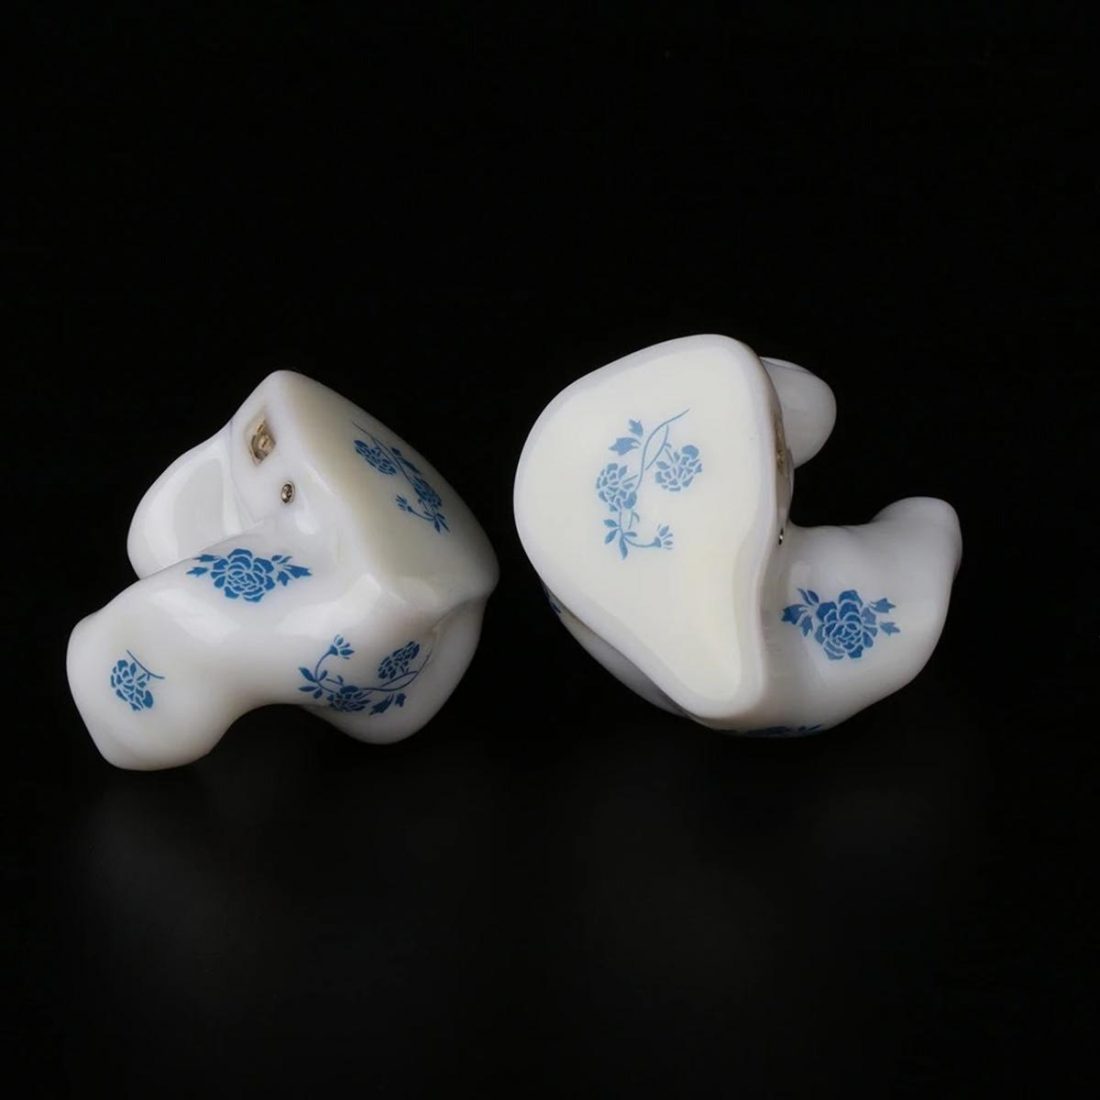 The Legacy 3 in CIEM Chinese White shells. (From linsoul.com)